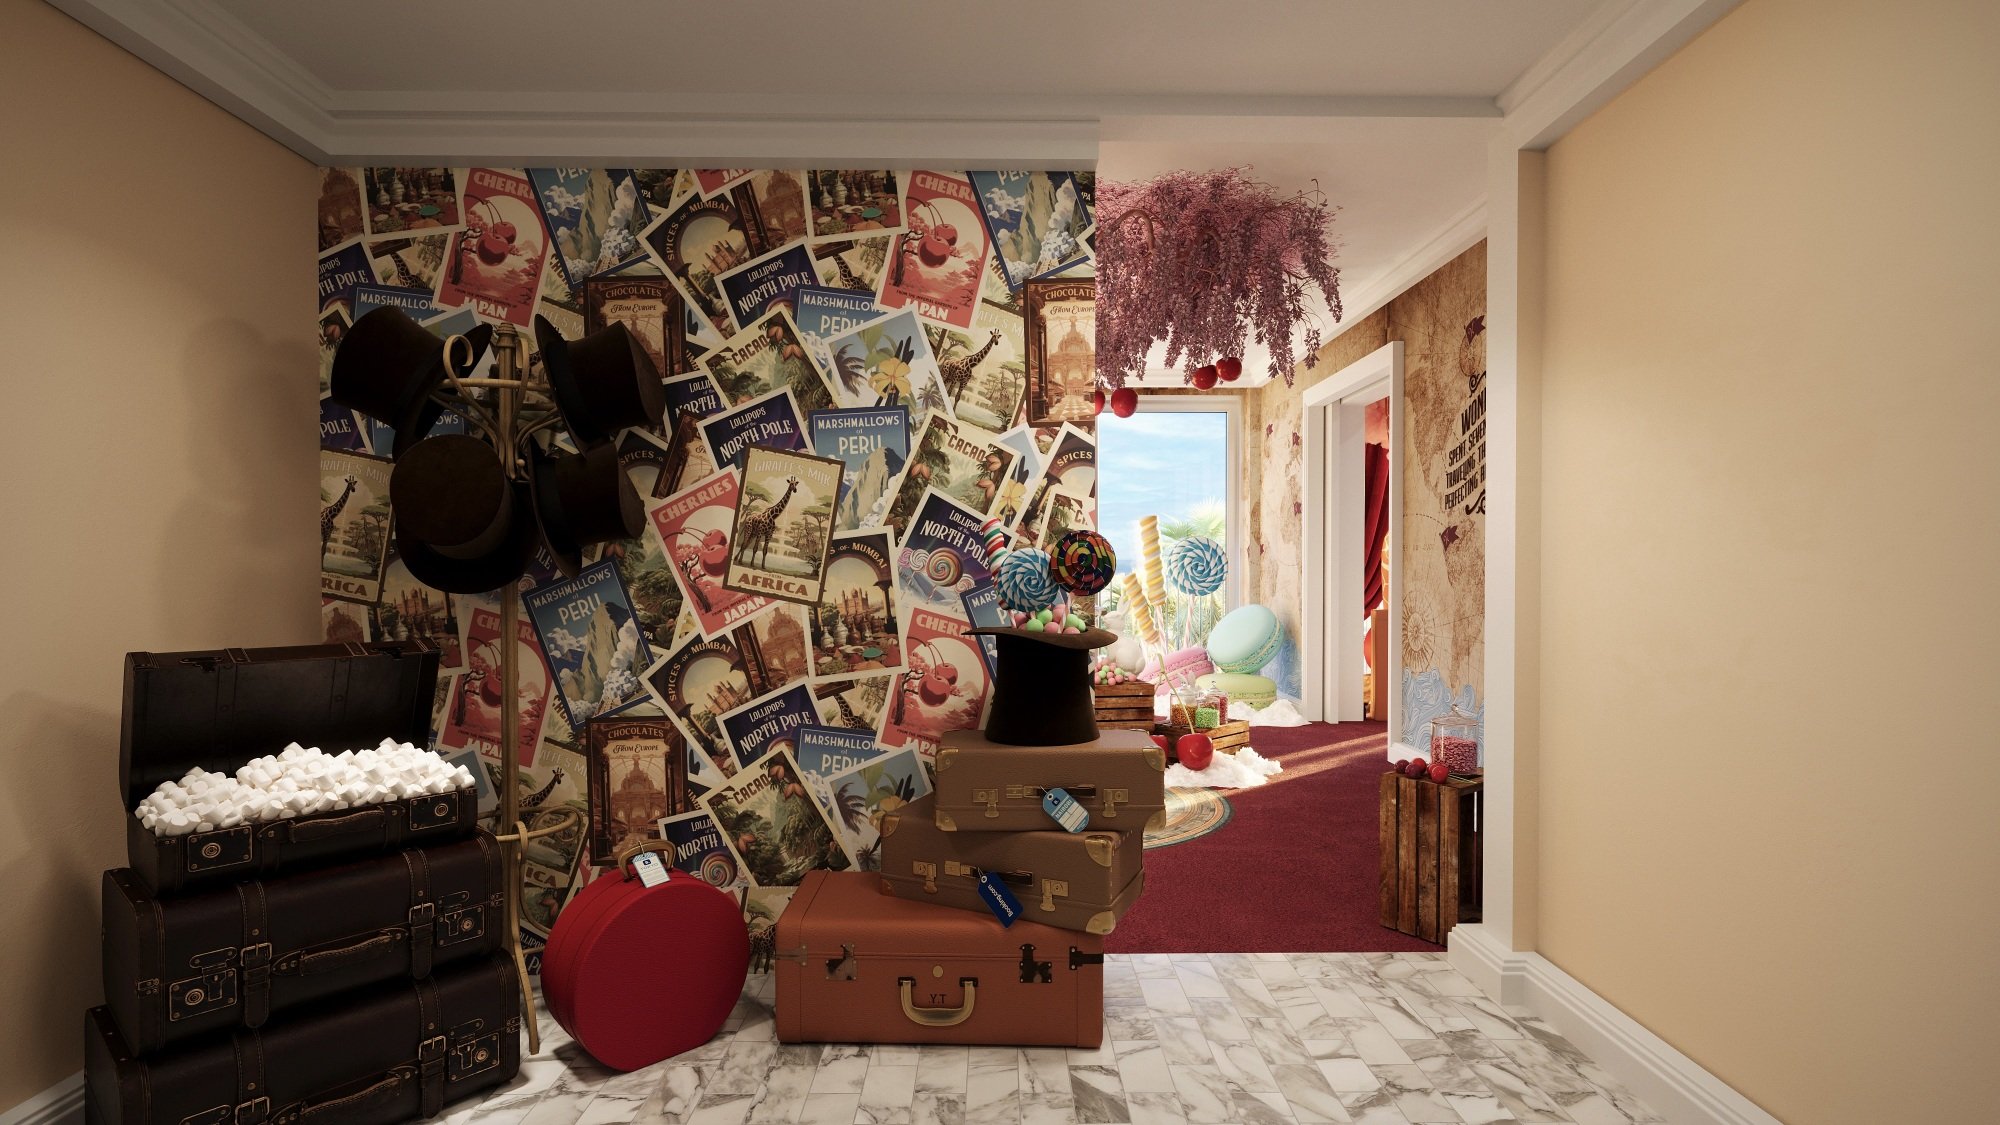 A "Wonka"-themed hotel room with a wall of vintage travel posters and a trunk of marshmallows.